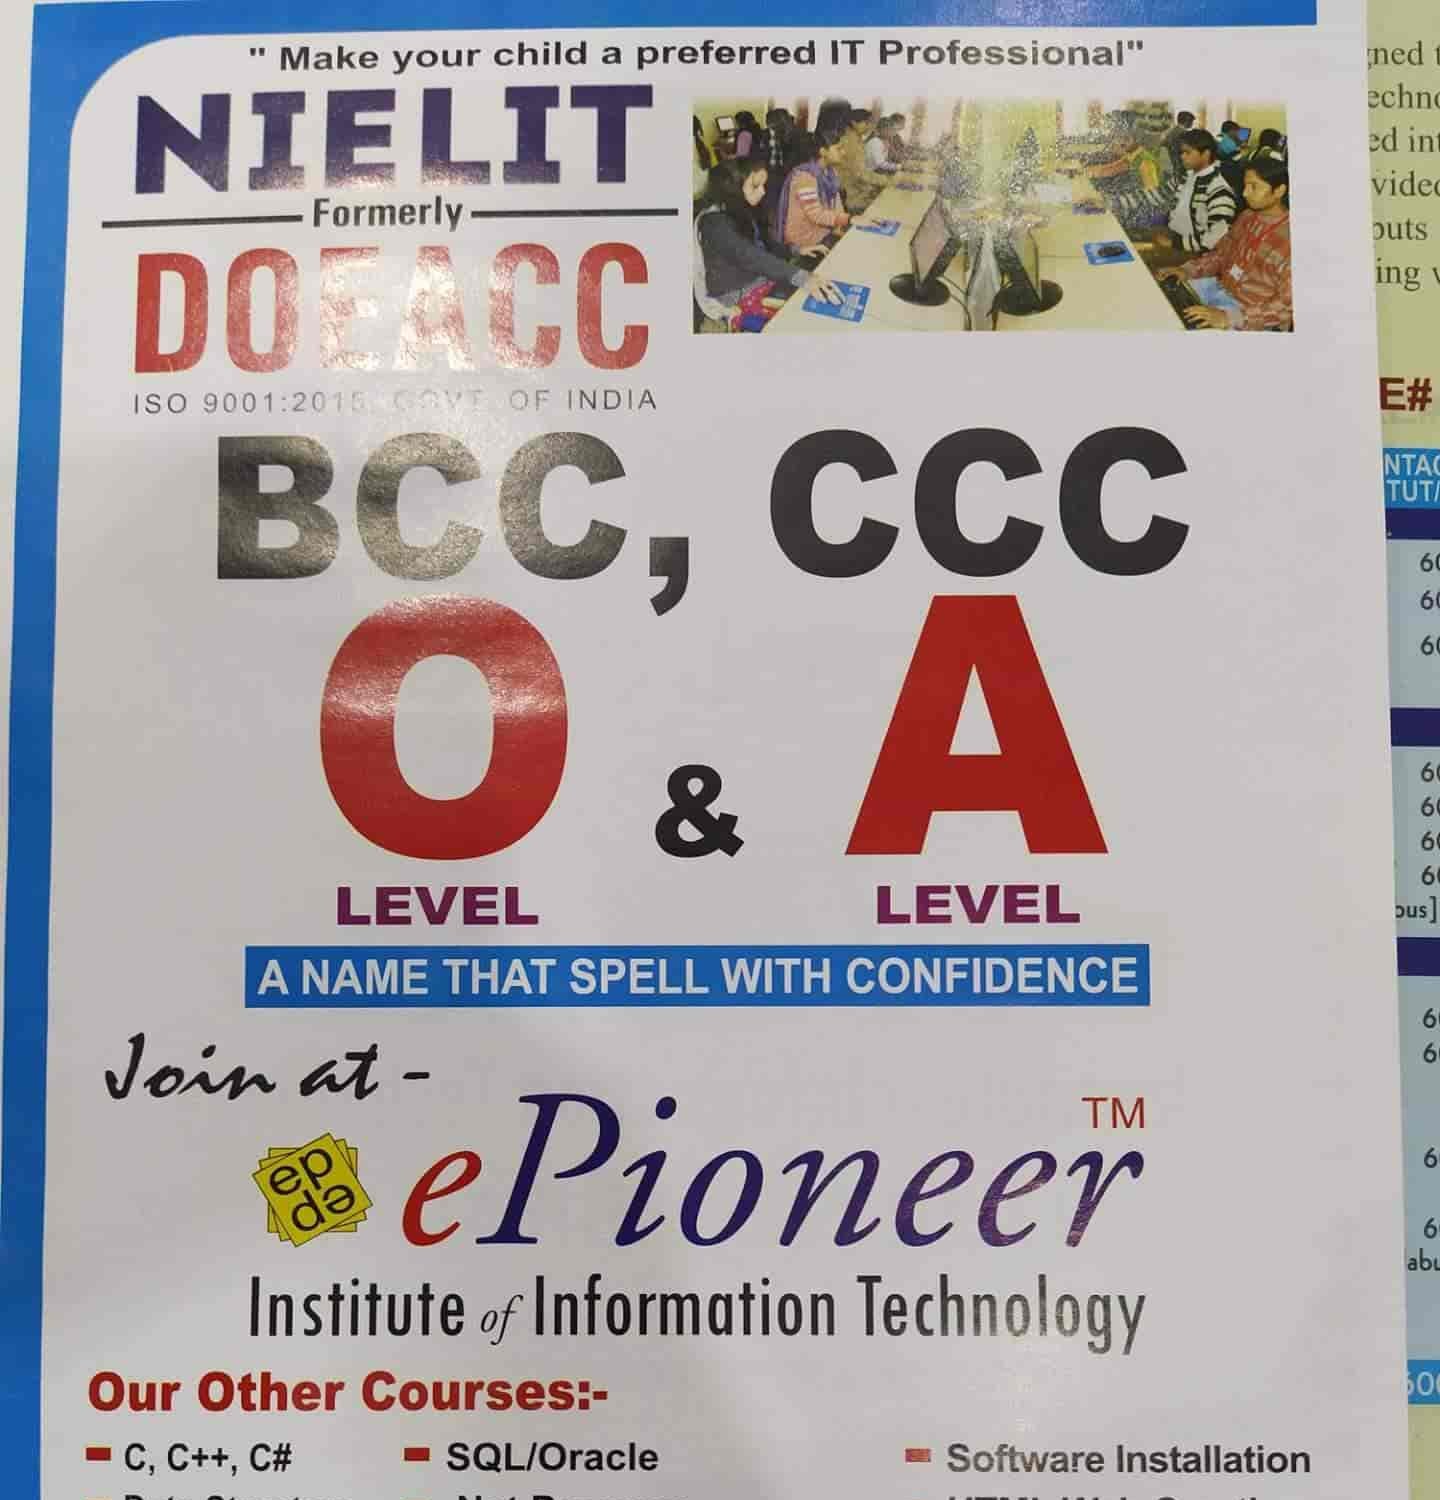 Prices at E-pioneer Compuware Pvt. Ltd. - Training courses ...